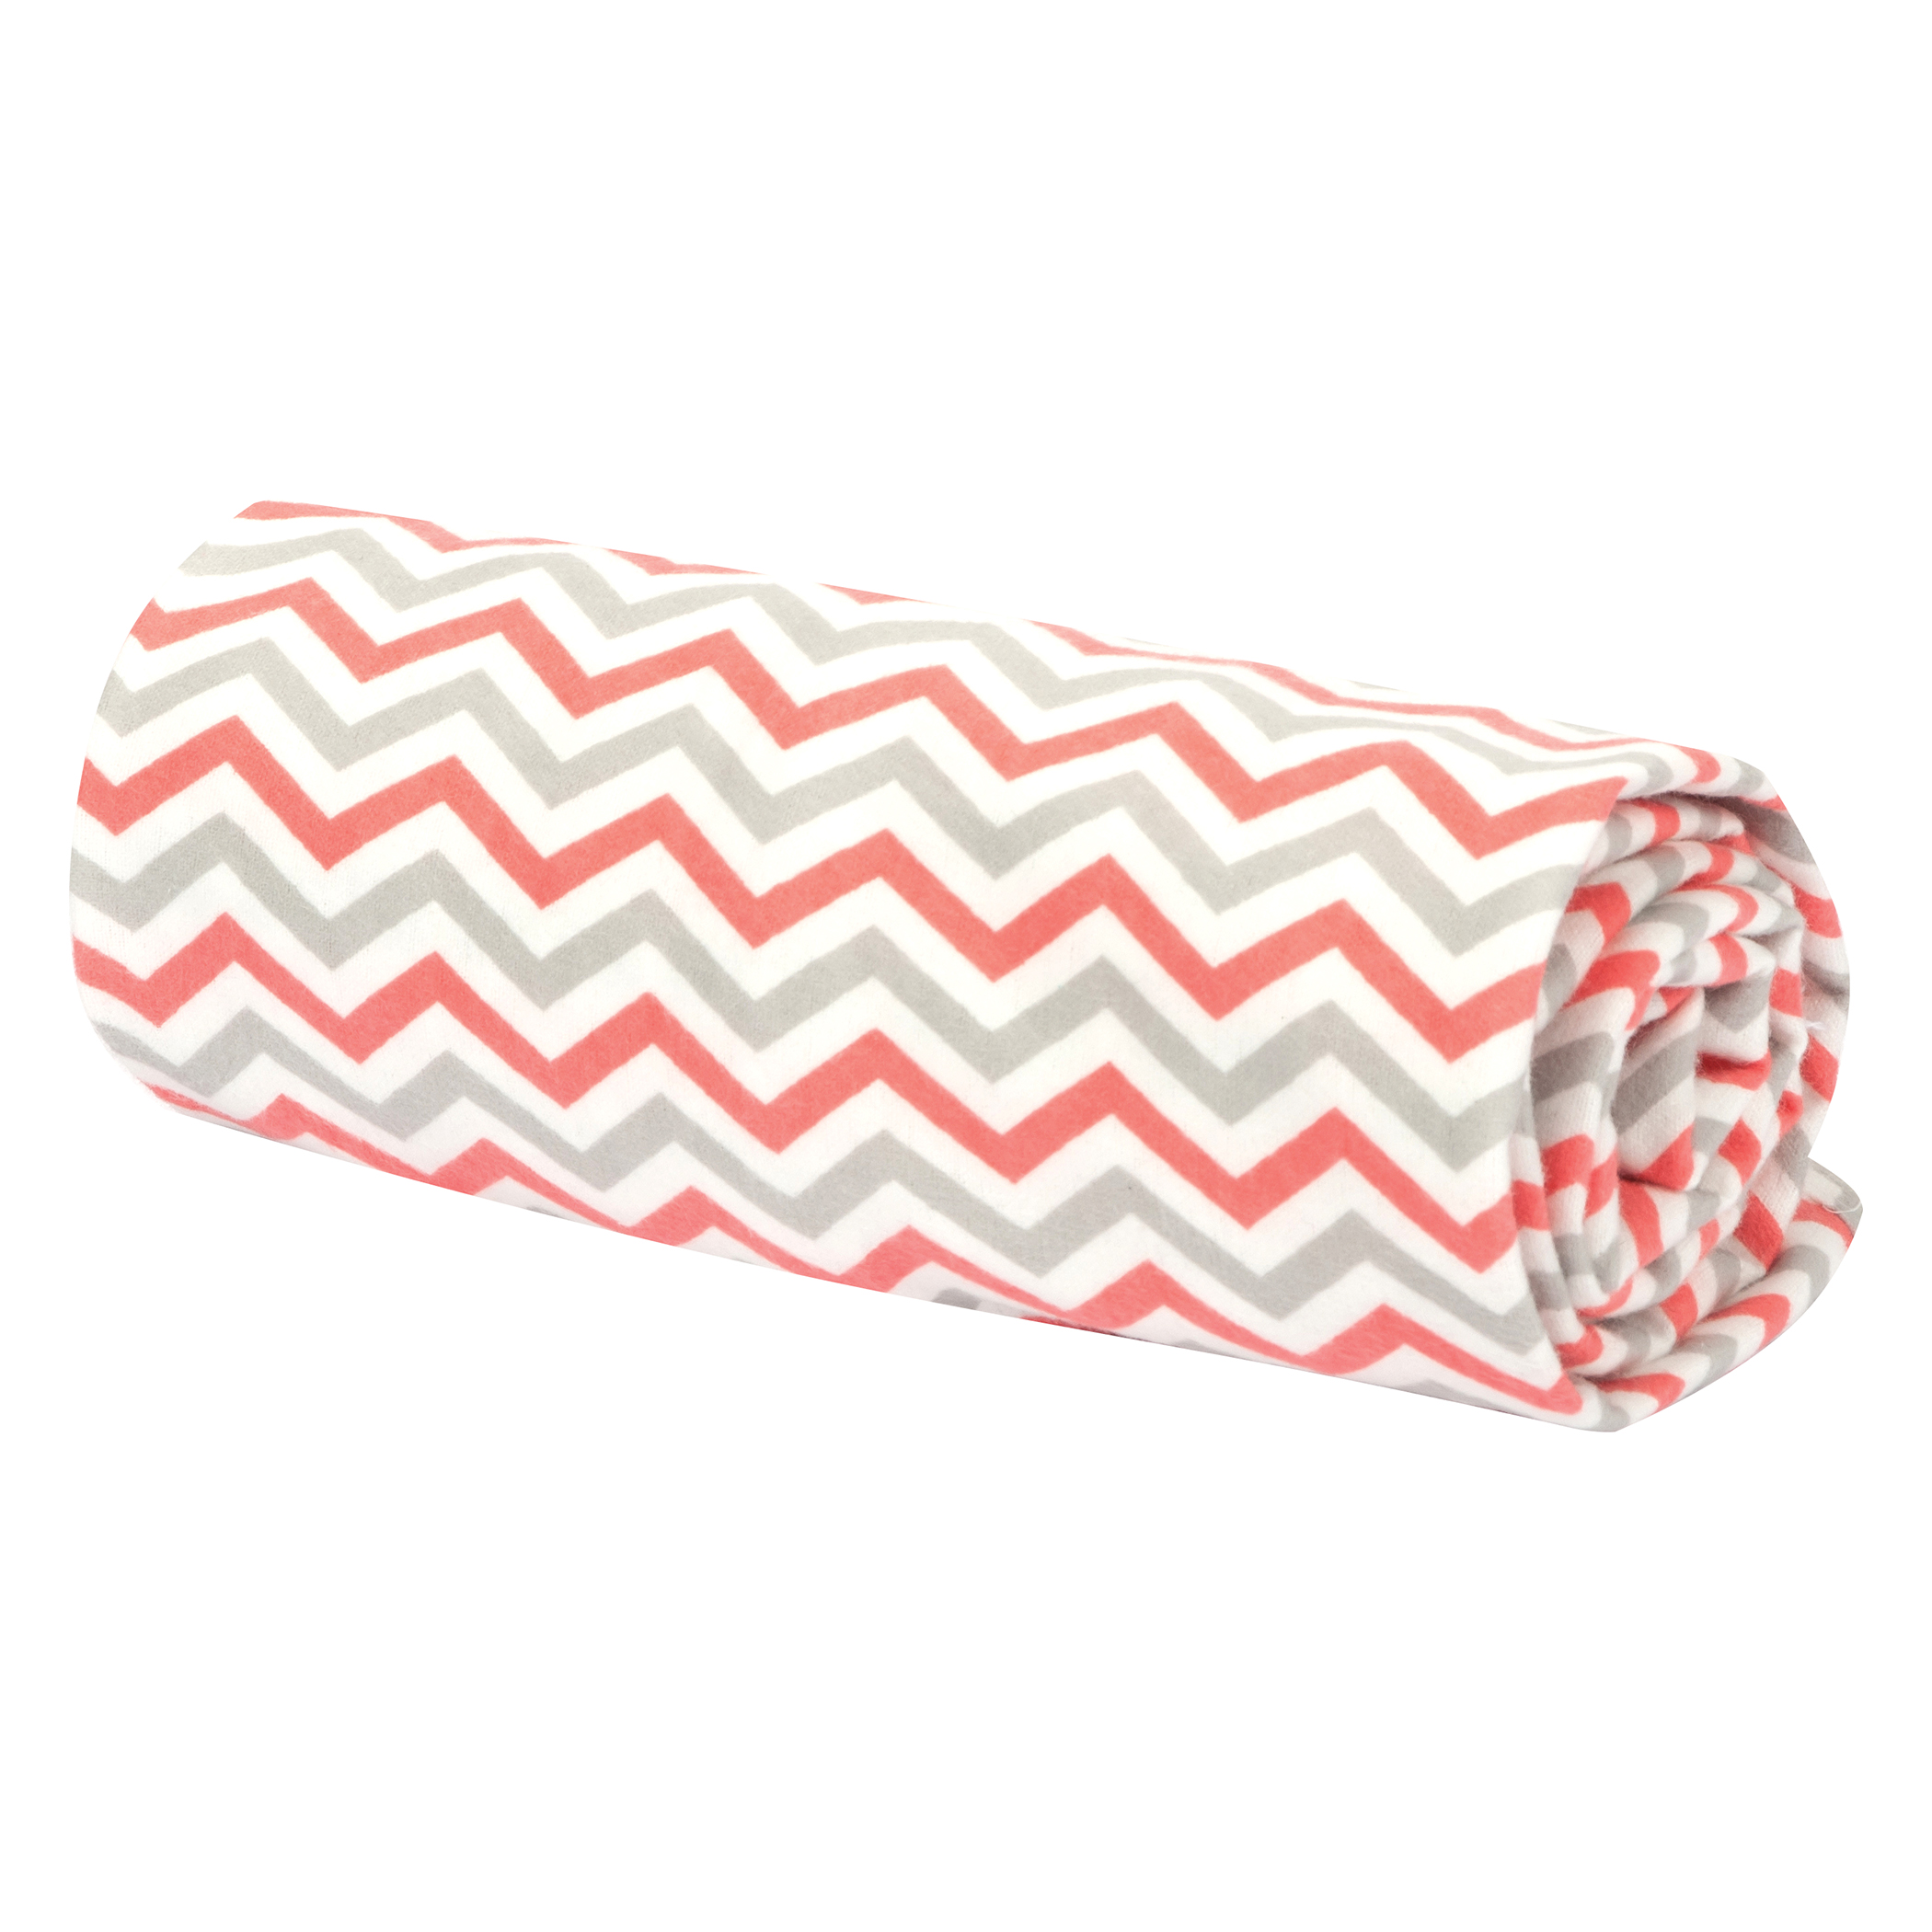 Coral & Gray Flannel Swaddle Blanket - Trend Lab